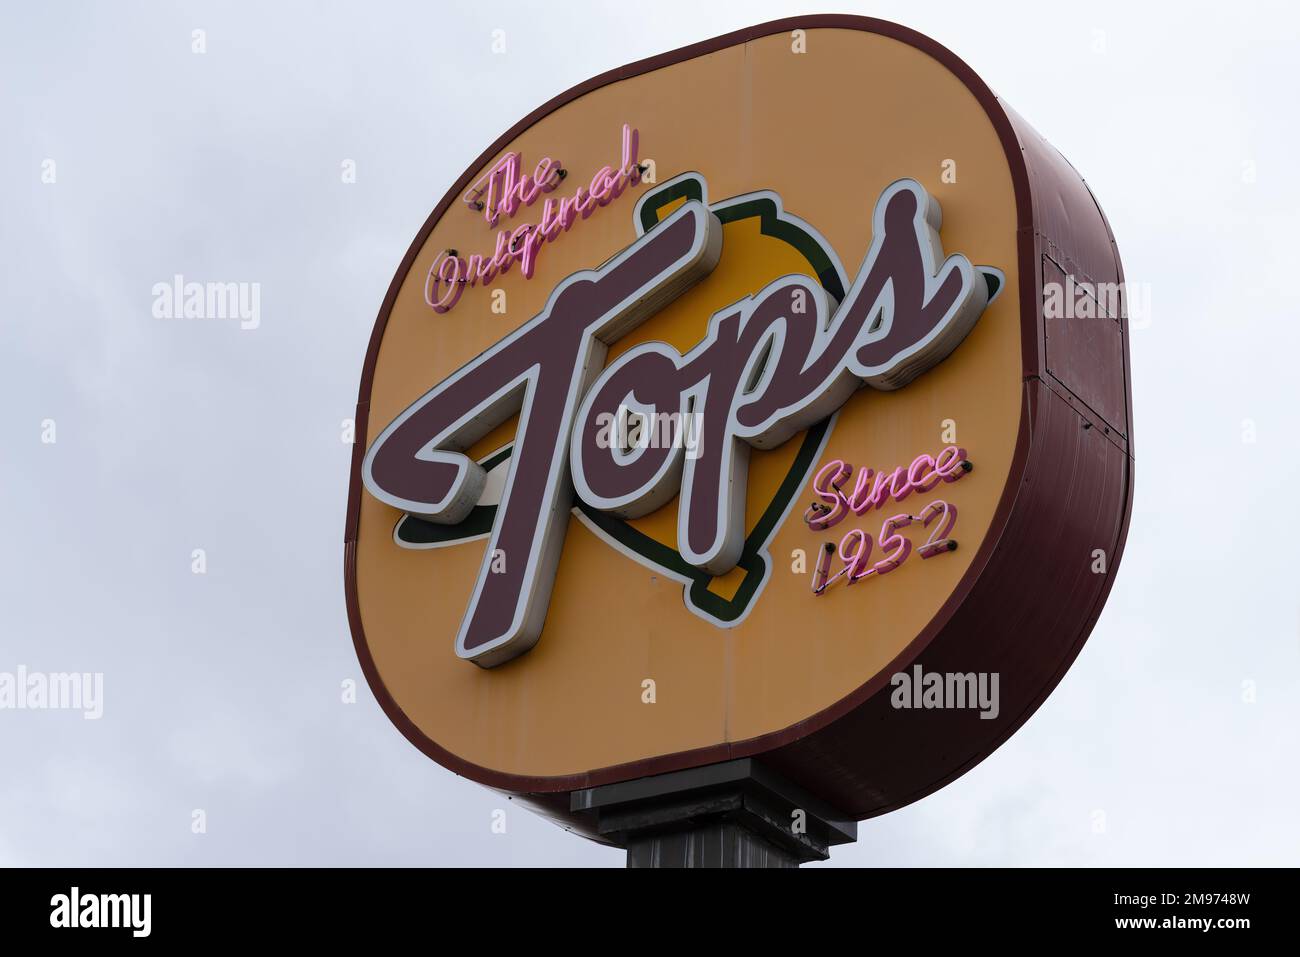 Pasadena, California, United States - January 15, 2023: Tops Restaurant neon sign in the City of Pasadena shown on an overcast day. Stock Photo